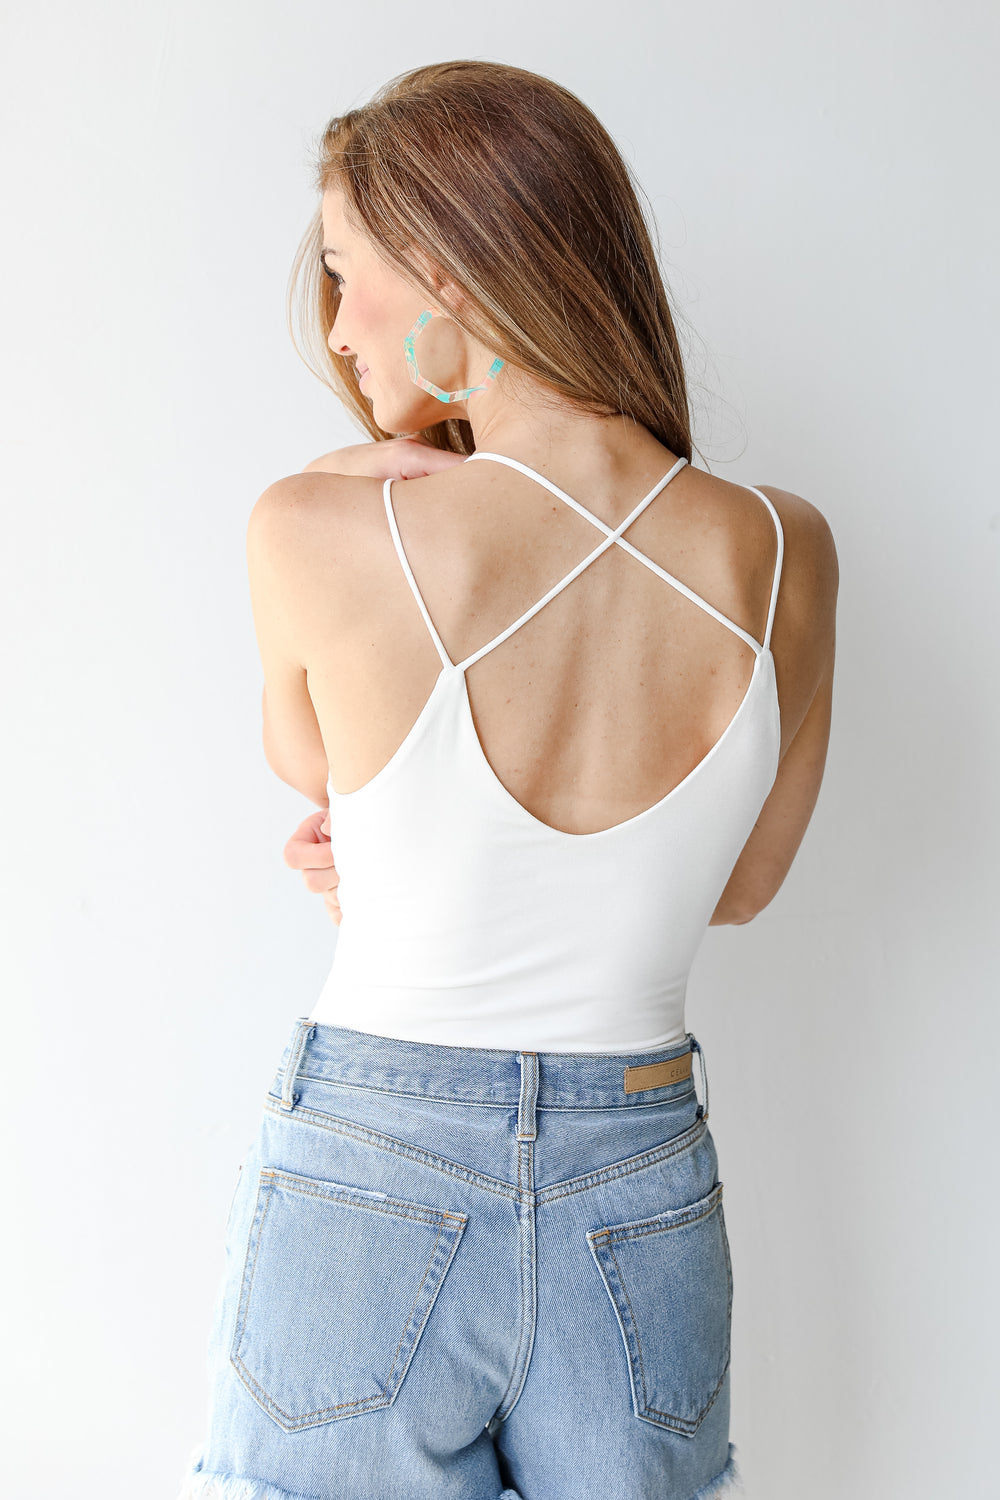 Bodysuit in ivory back view